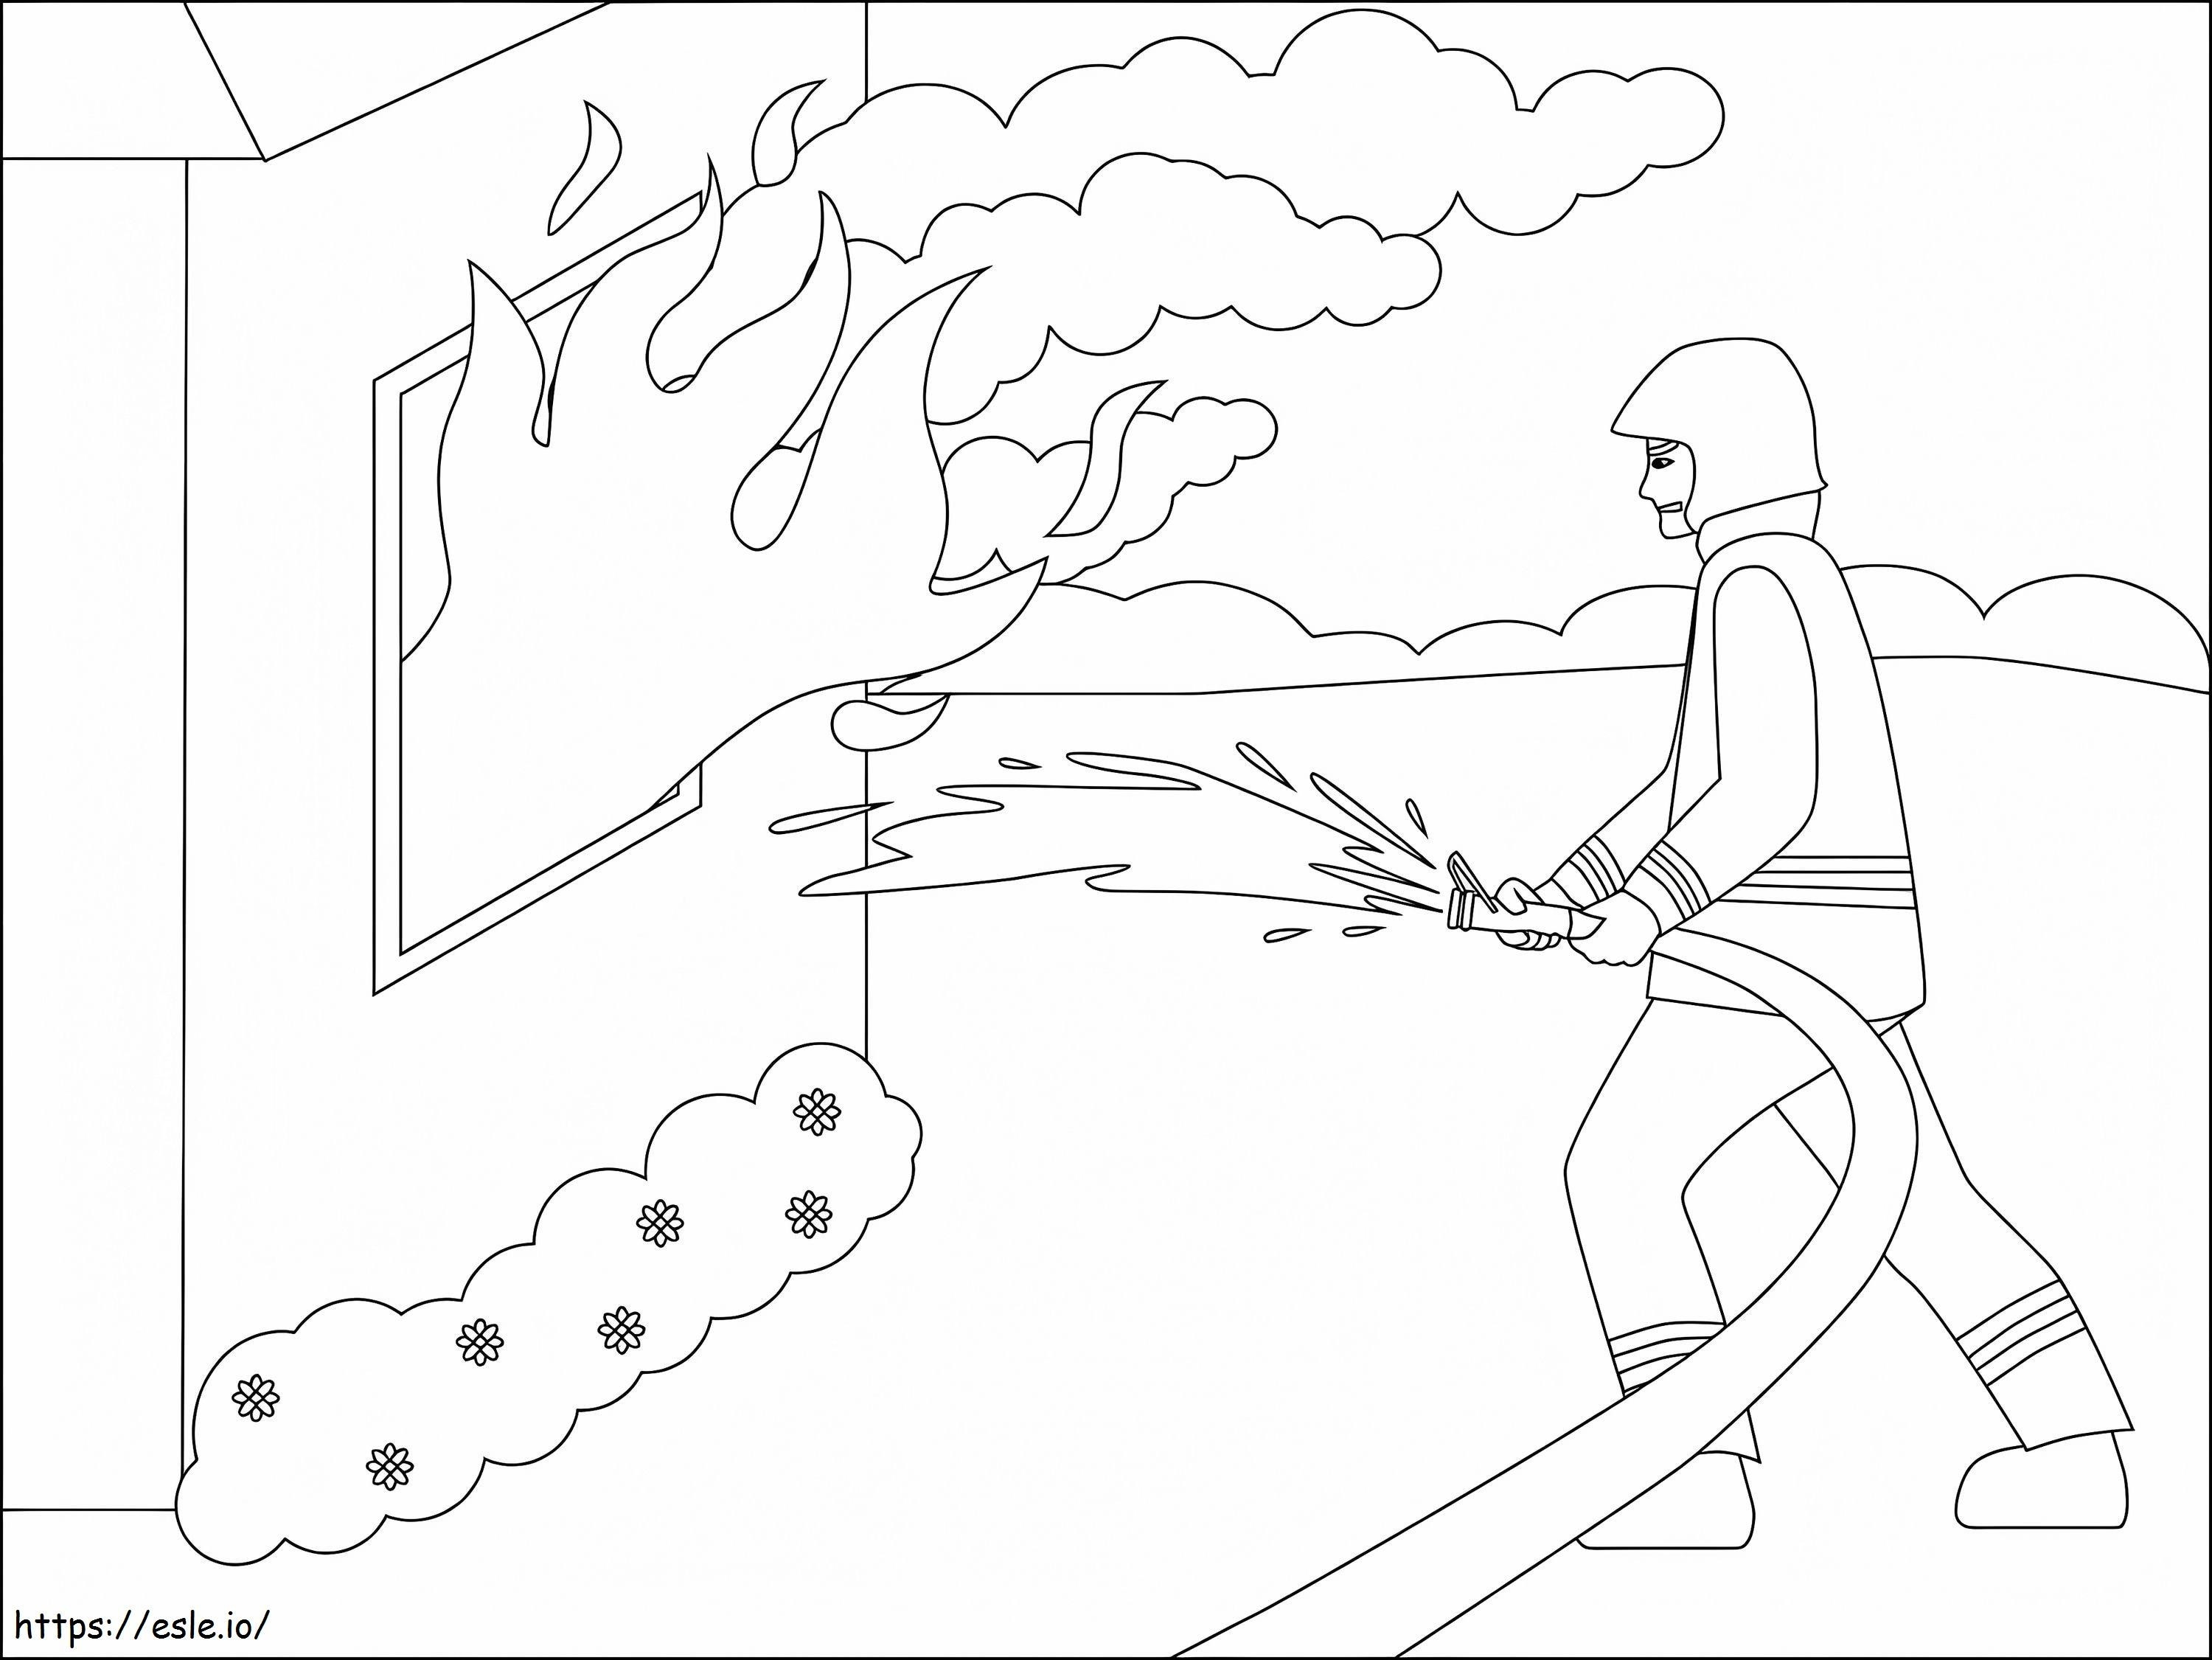 Firefighter 1 coloring page